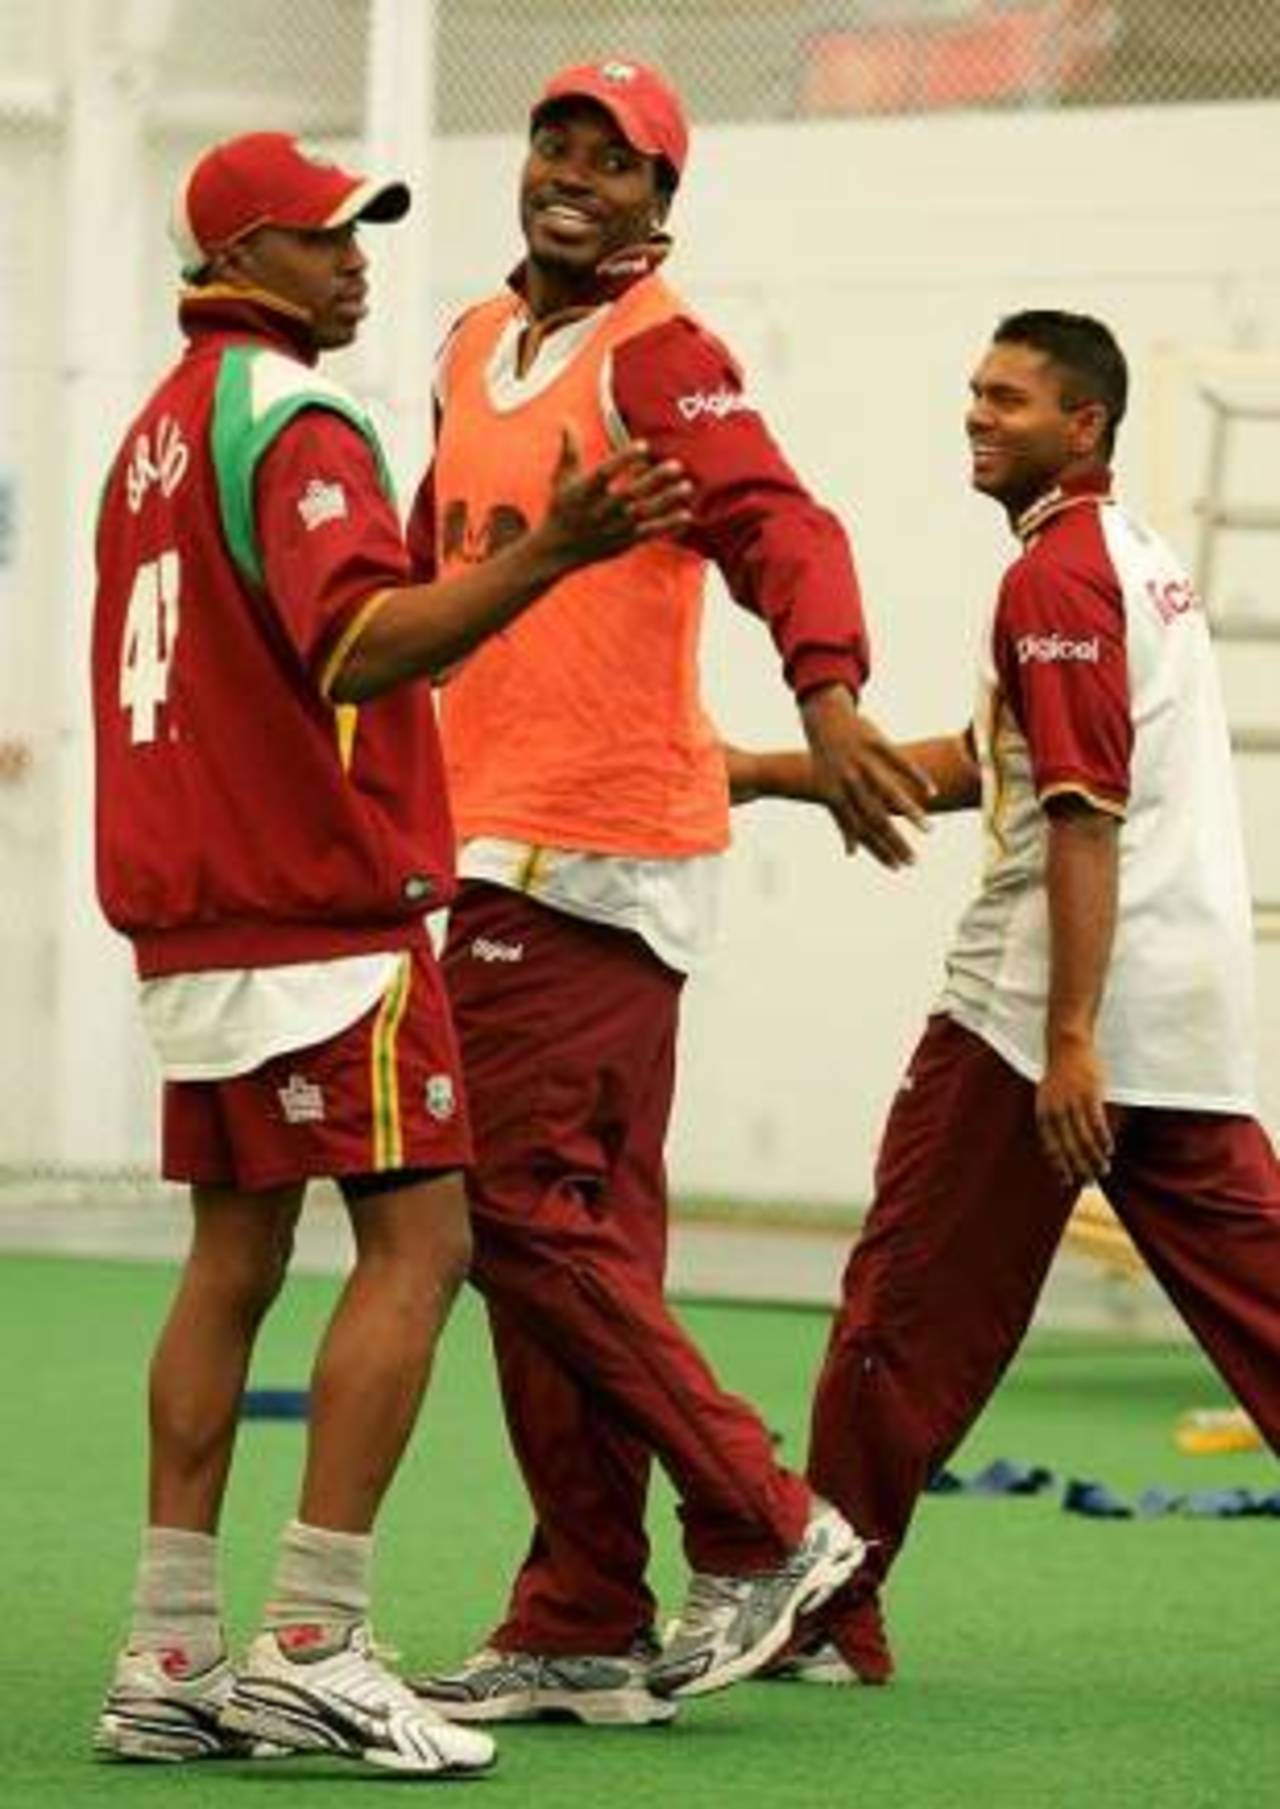 Chris Gayle, Dwayne Bravo and Shivnarine Chanderpaul in the indoor nets at Loughborough ahead of the 3rd ODI between England and West Indies at Trent Bridge, July 6, 2007